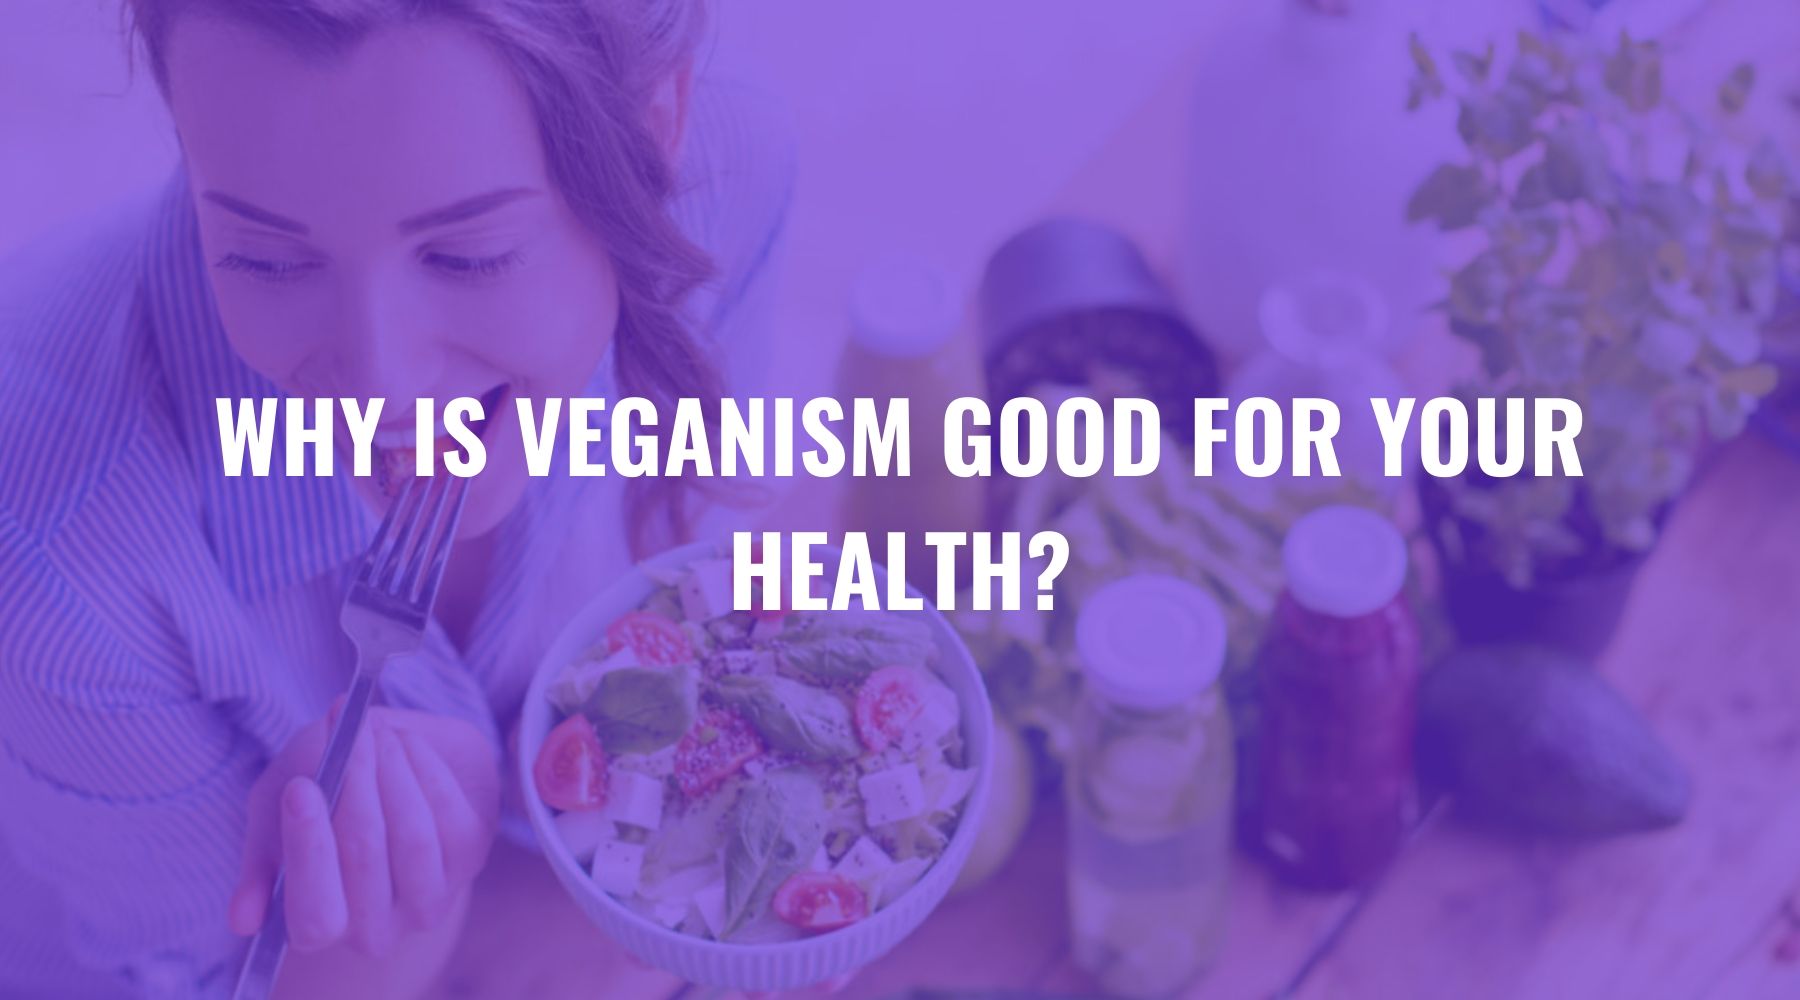 Why is Veganism Good for Your Health?